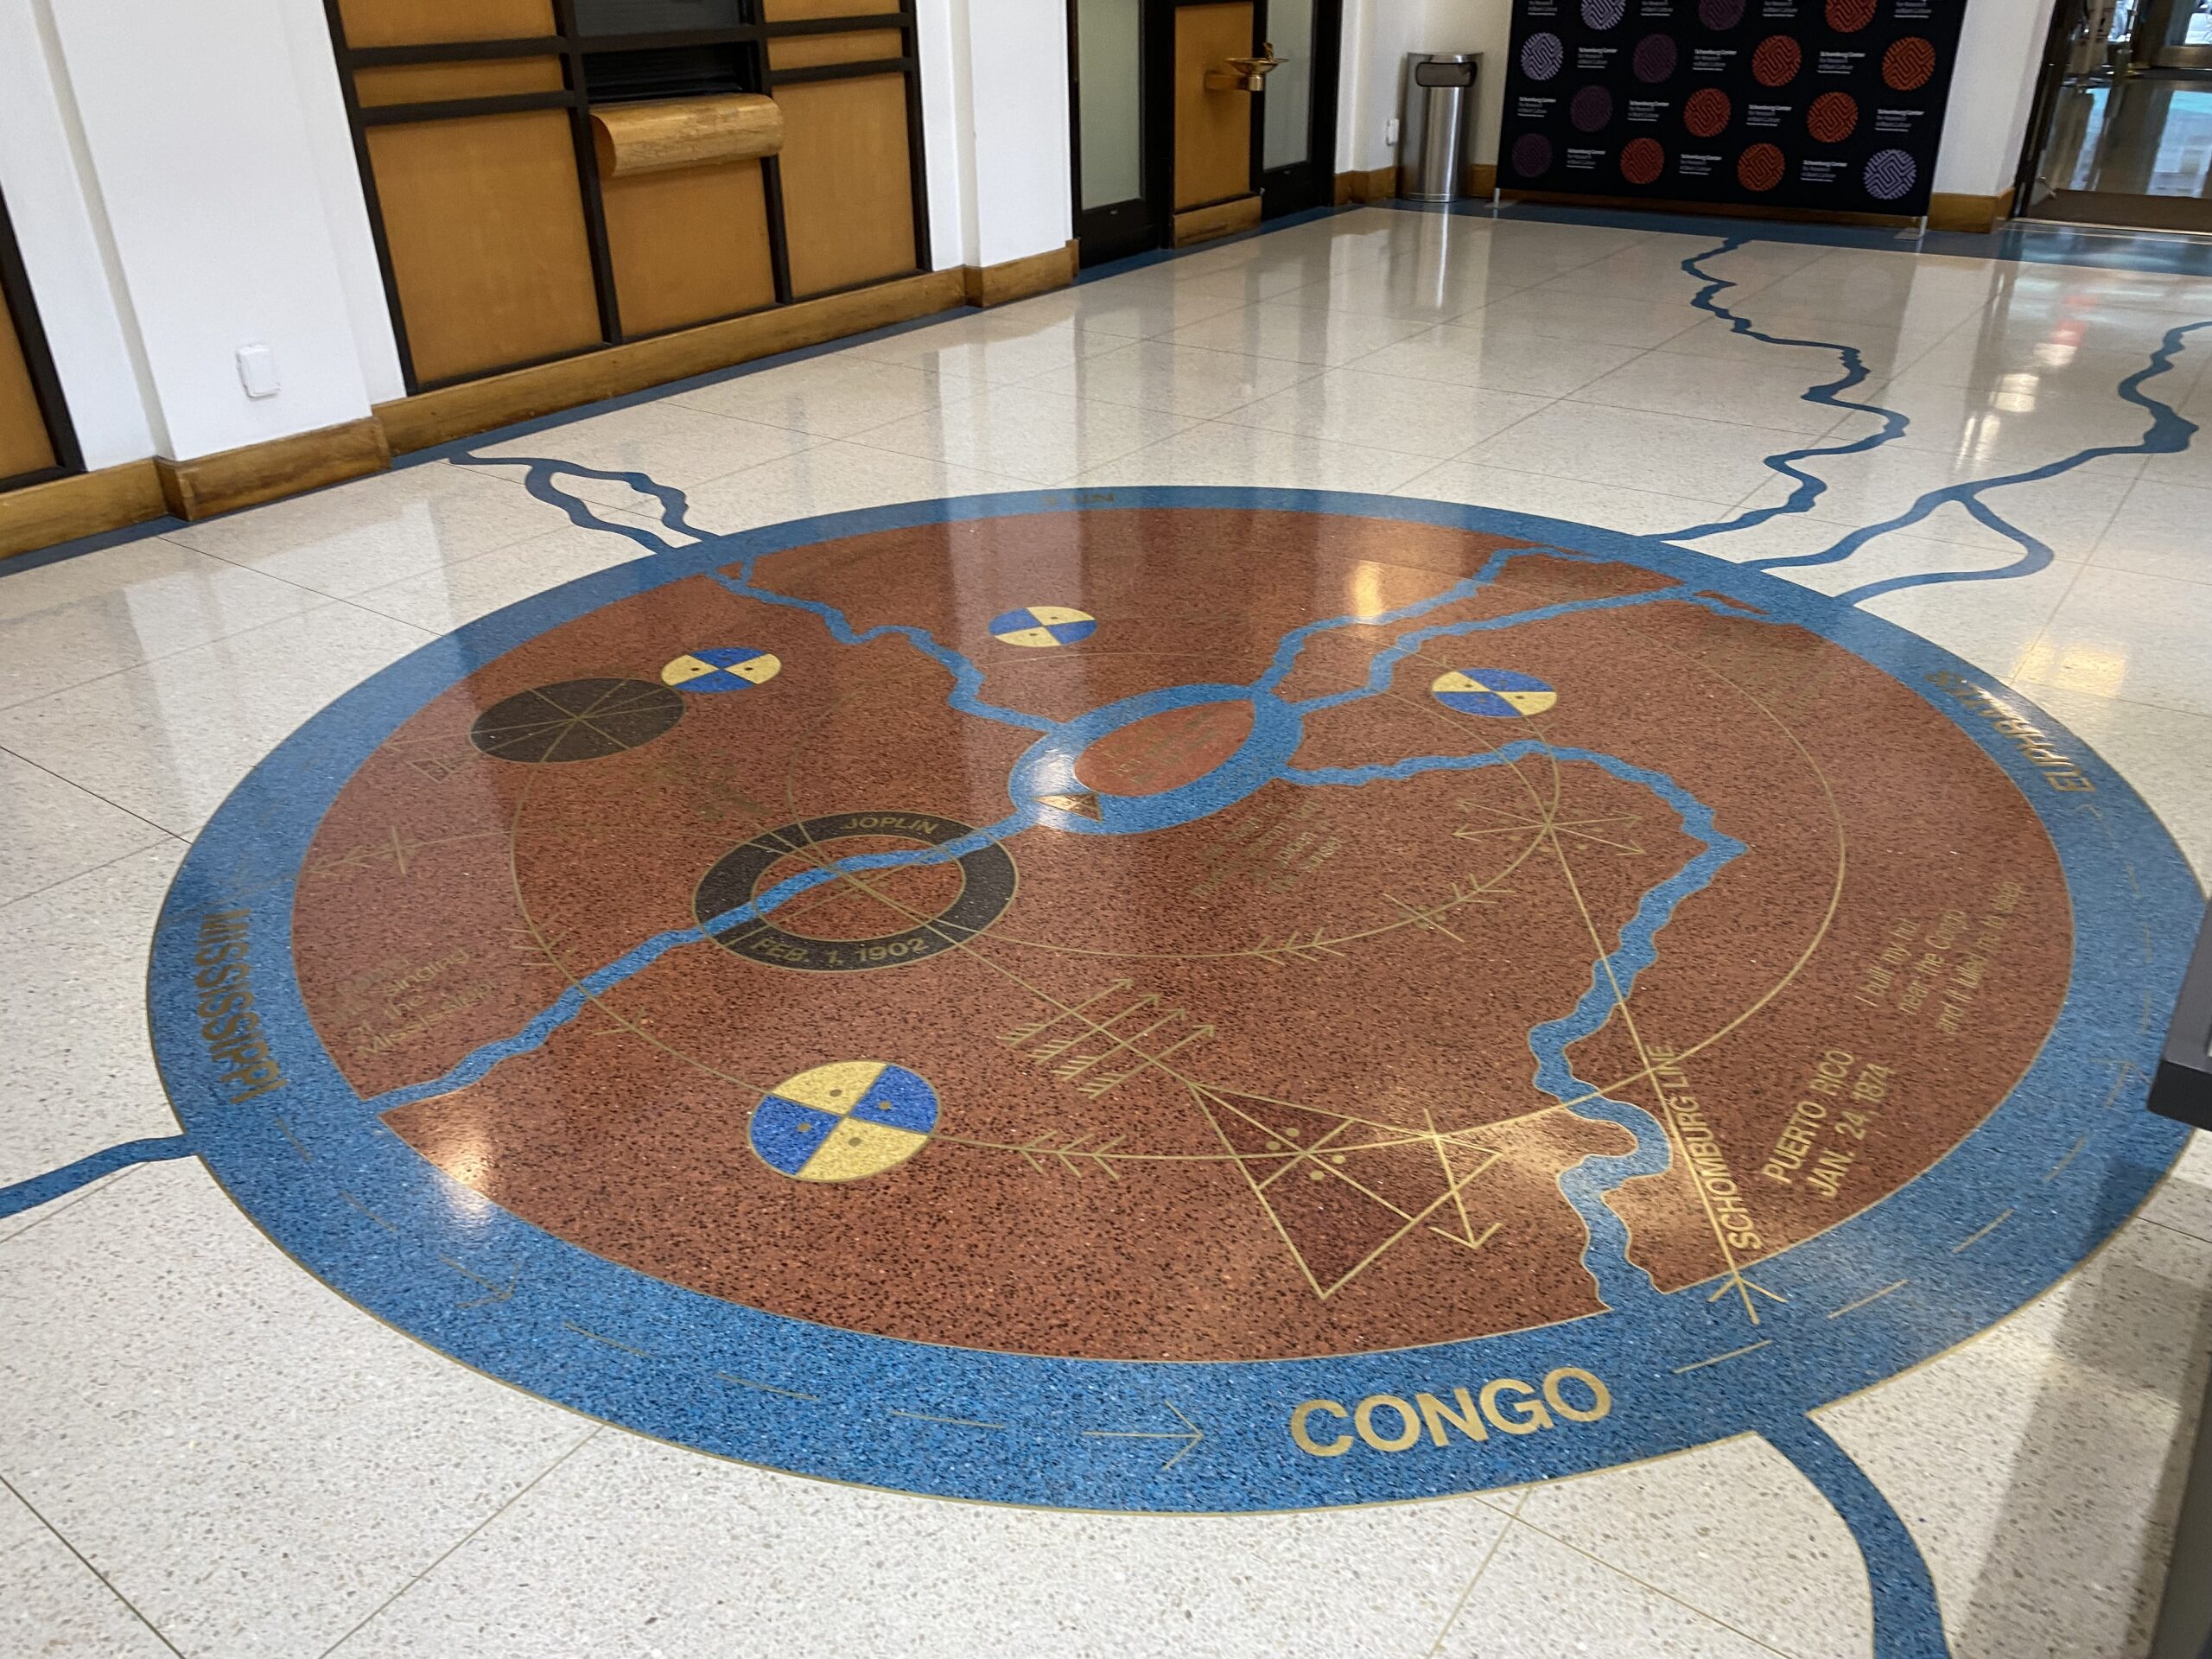 The "Rivers Cosmogram" in The Schomburg Center For Research and Black Culture. (Credit: Samuel Eli Shepherd).